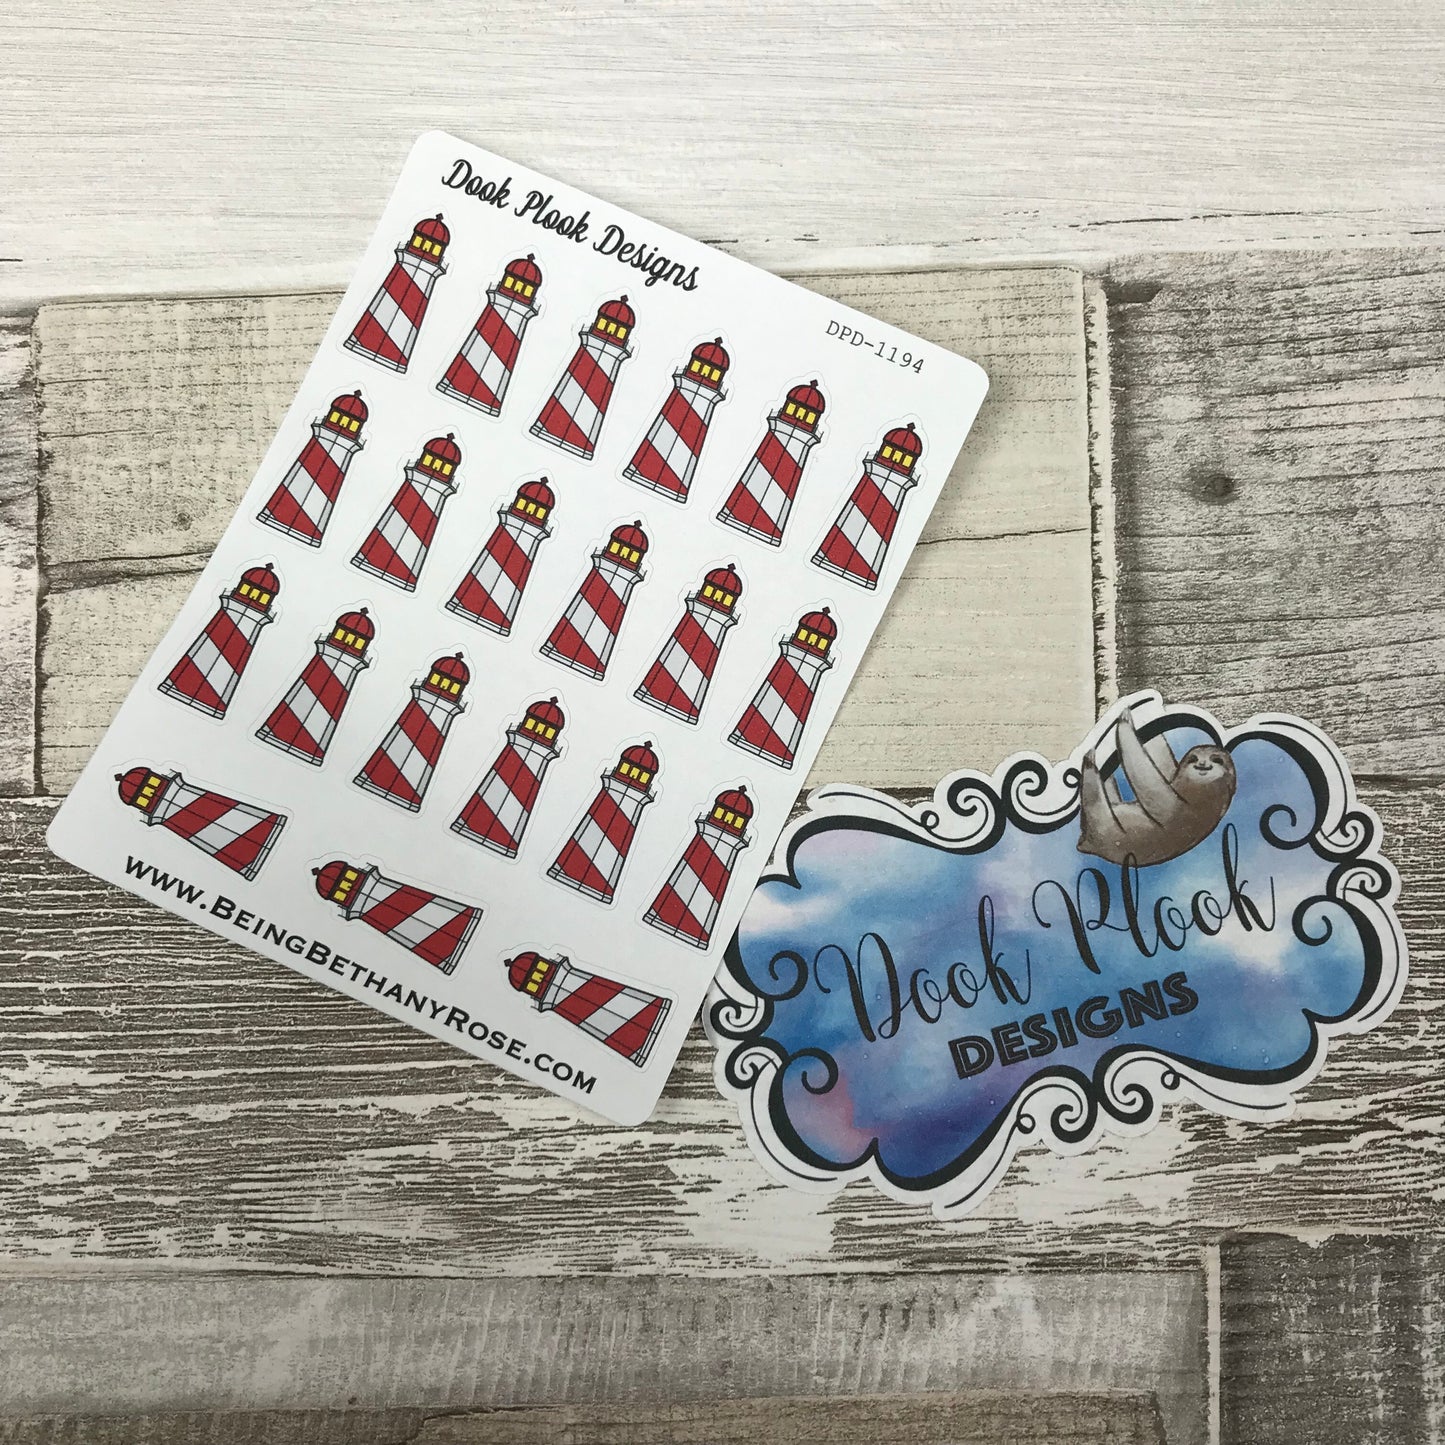 Lighthouse stickers (DPD1194)